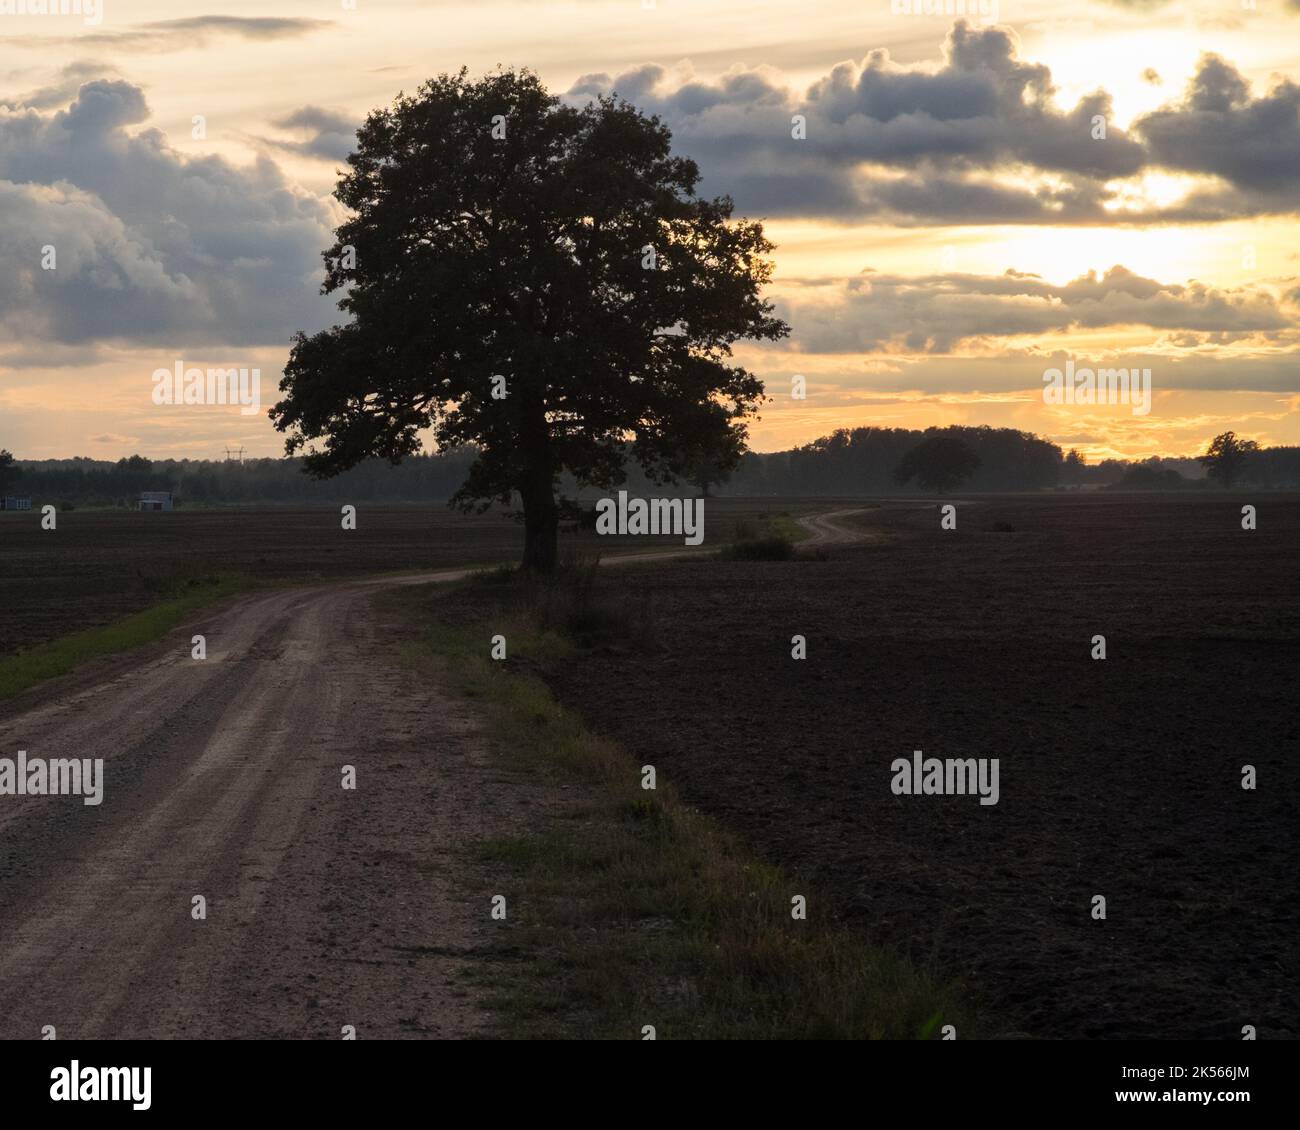 A country road through ploughed fields with a tree silhouette and distant sunset Stock Photo